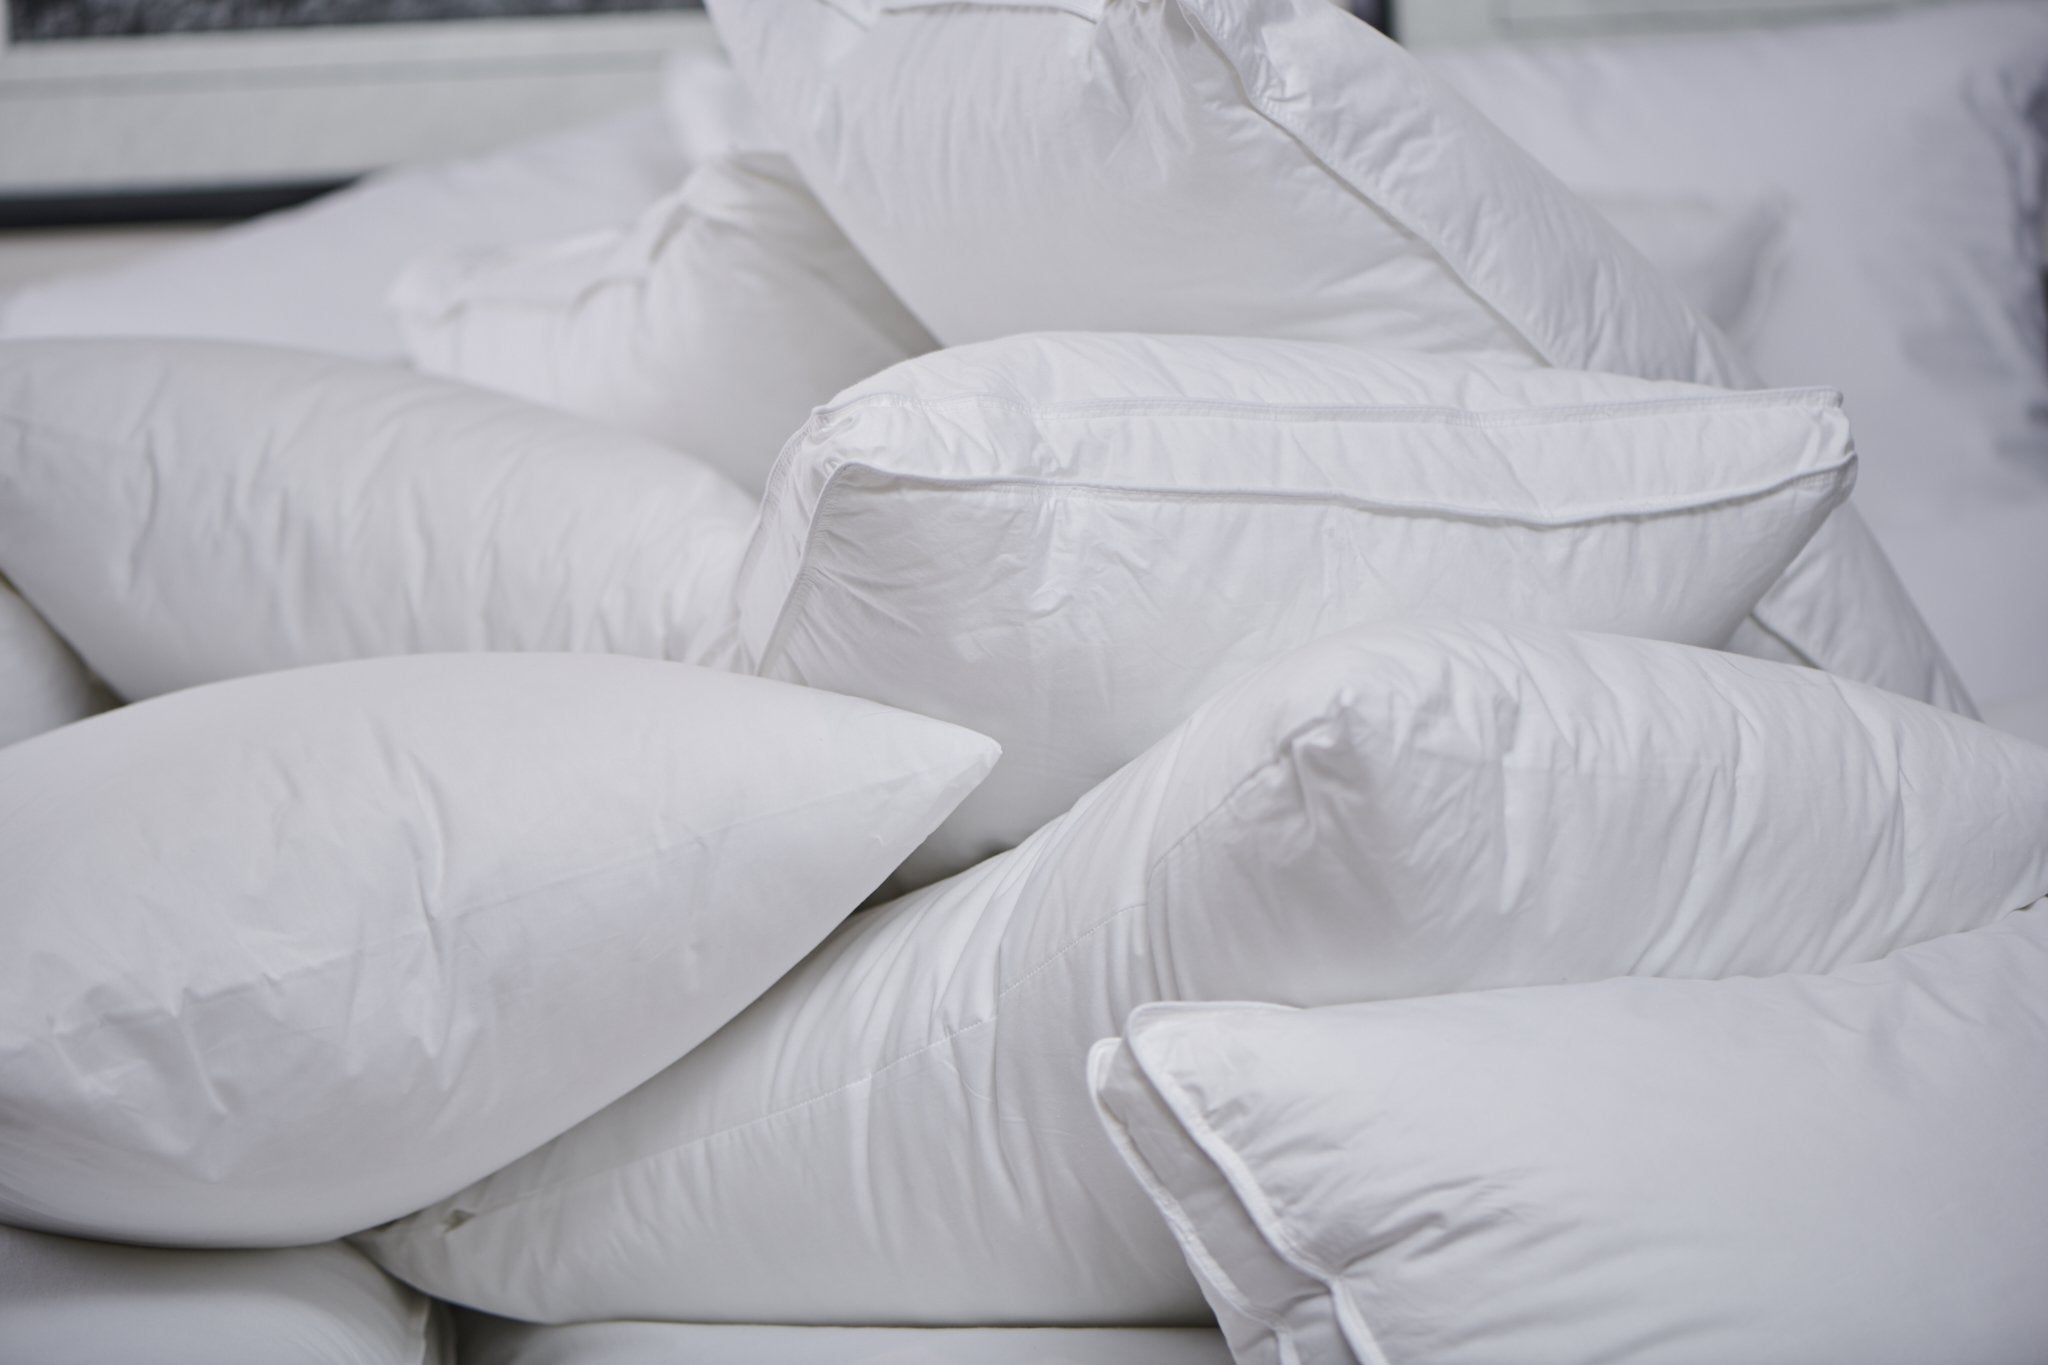 How to Pick the Perfect Pillow for You